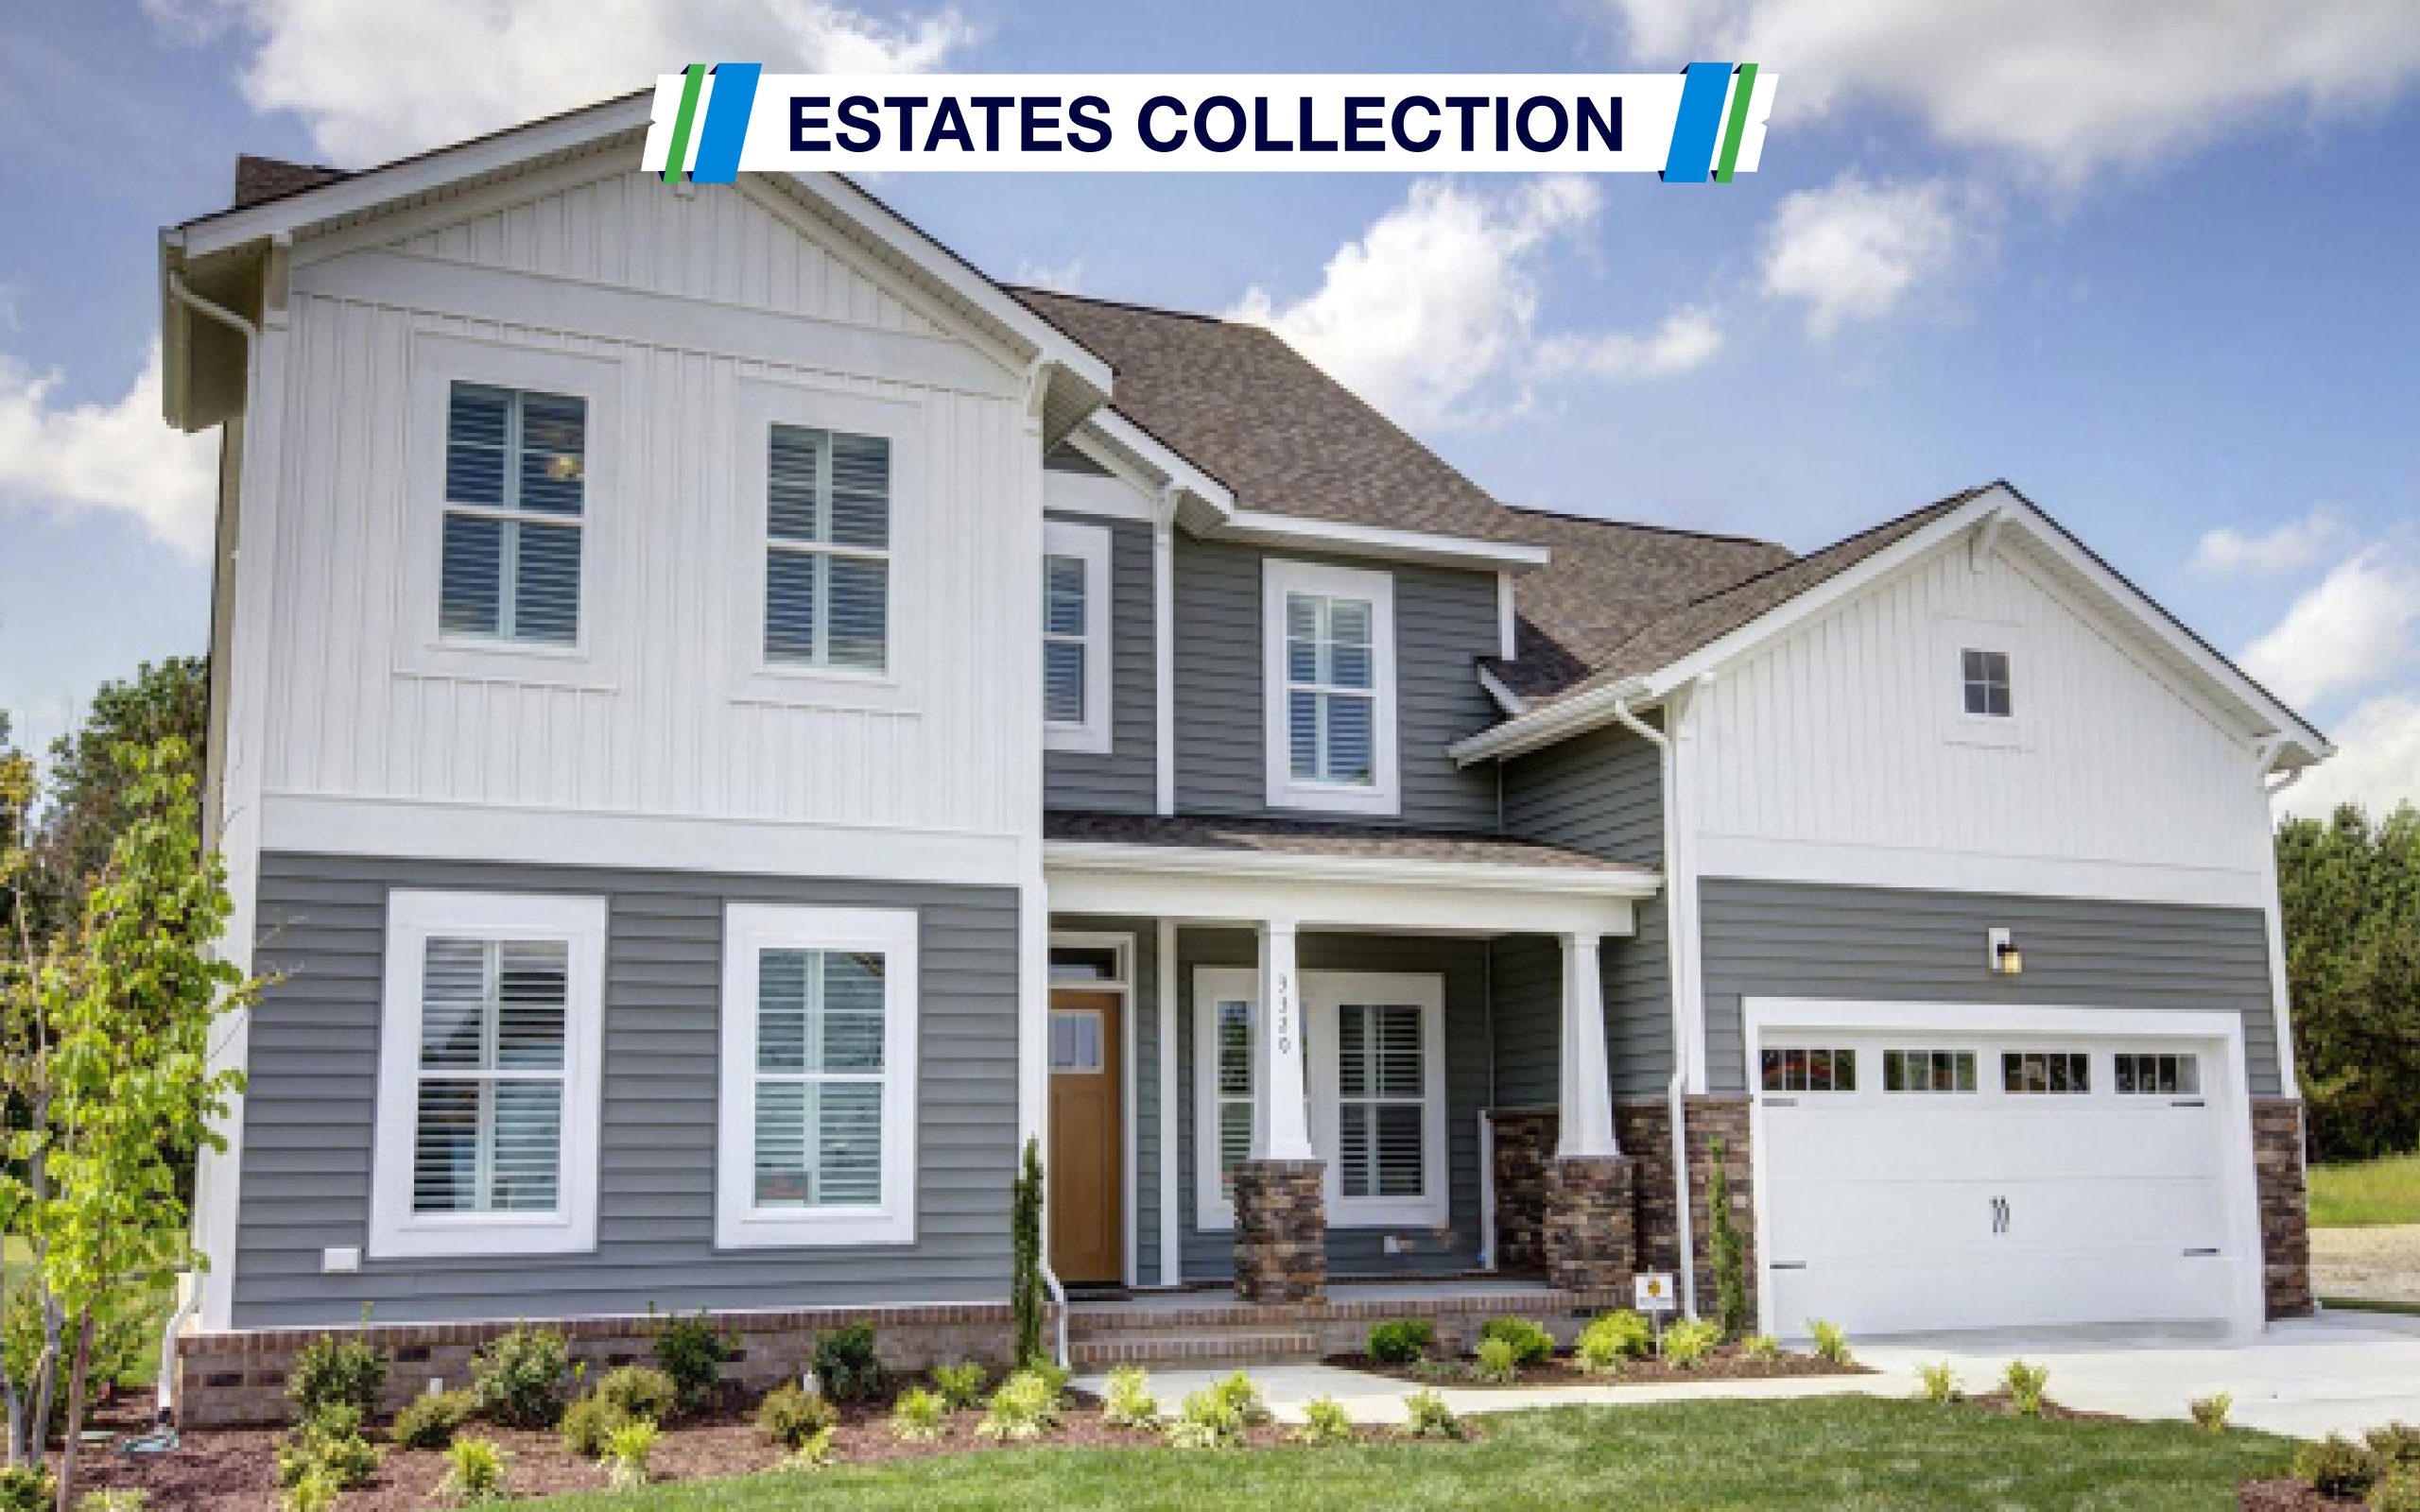 Image of the Milan Model - The Estates Collection. View of the front of this two story home. Exterior includes stone on the bottom, grey and white siding with white trim. Show the front porch , front door, two car garage and nine windows.